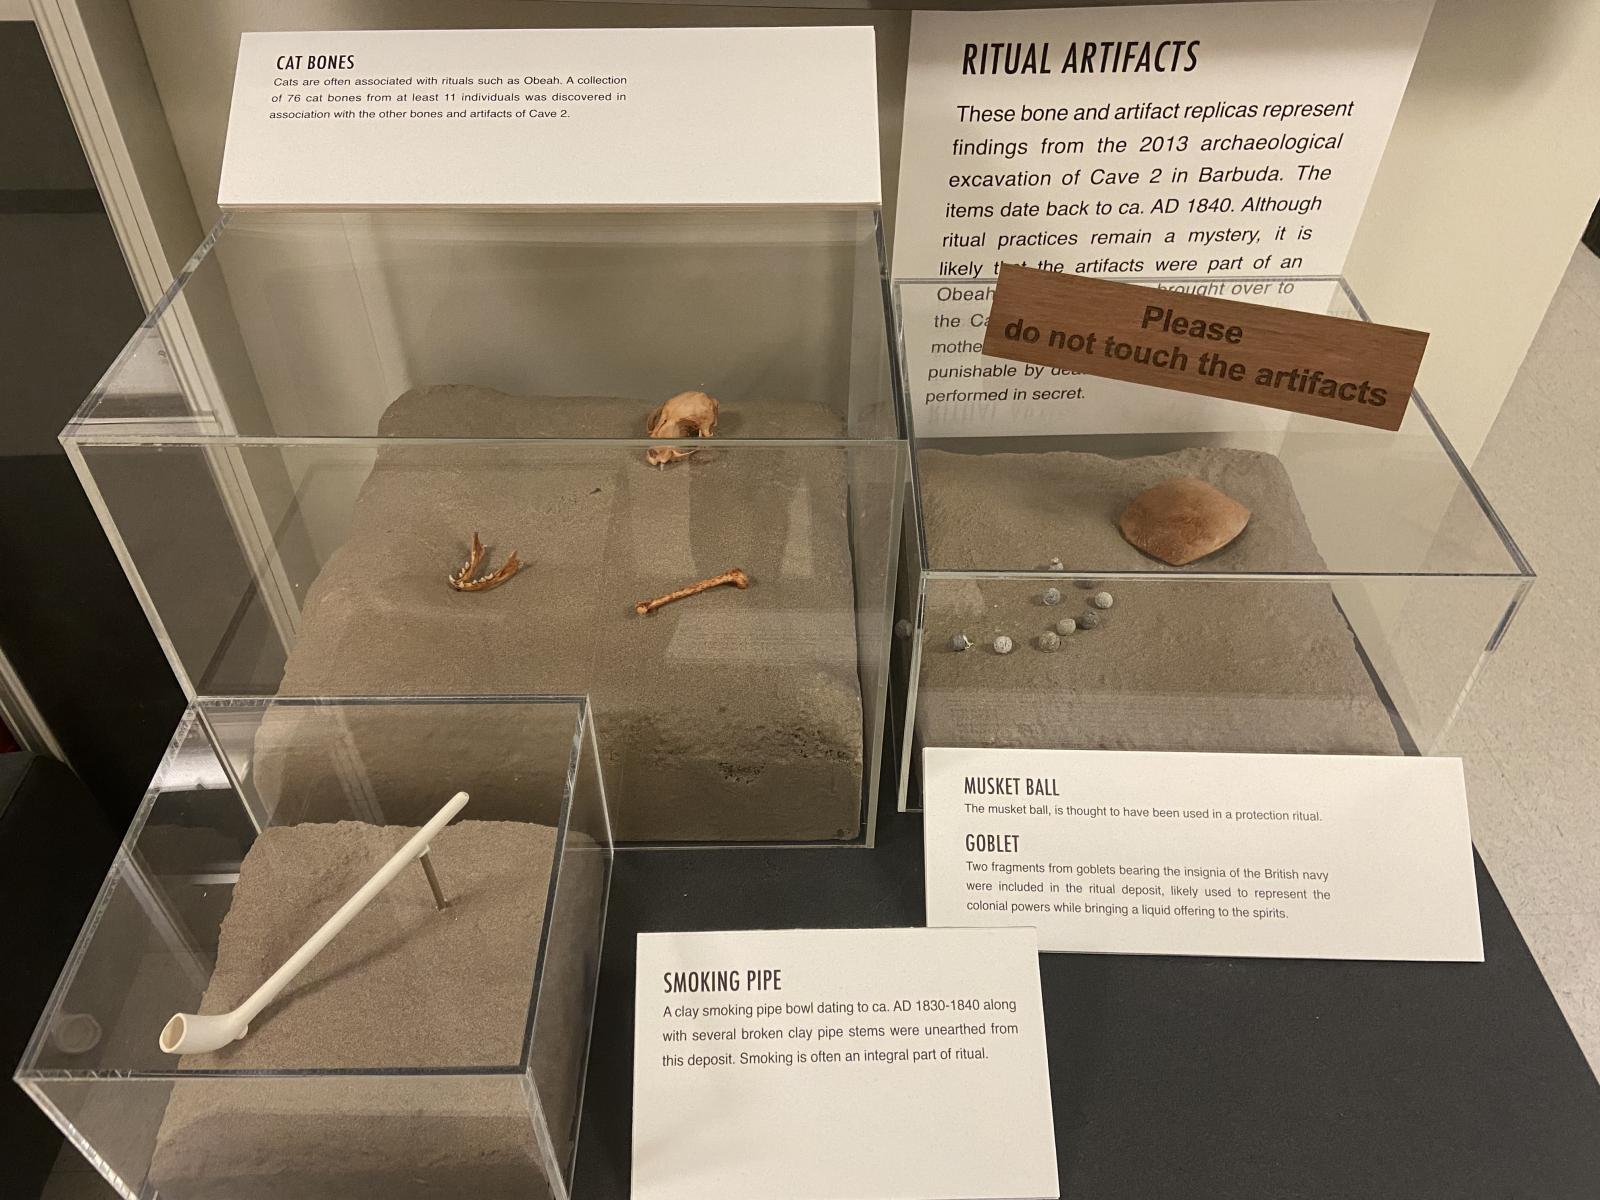 cat bones, pipe, clay fragments, and musket ball replicas in glass cases